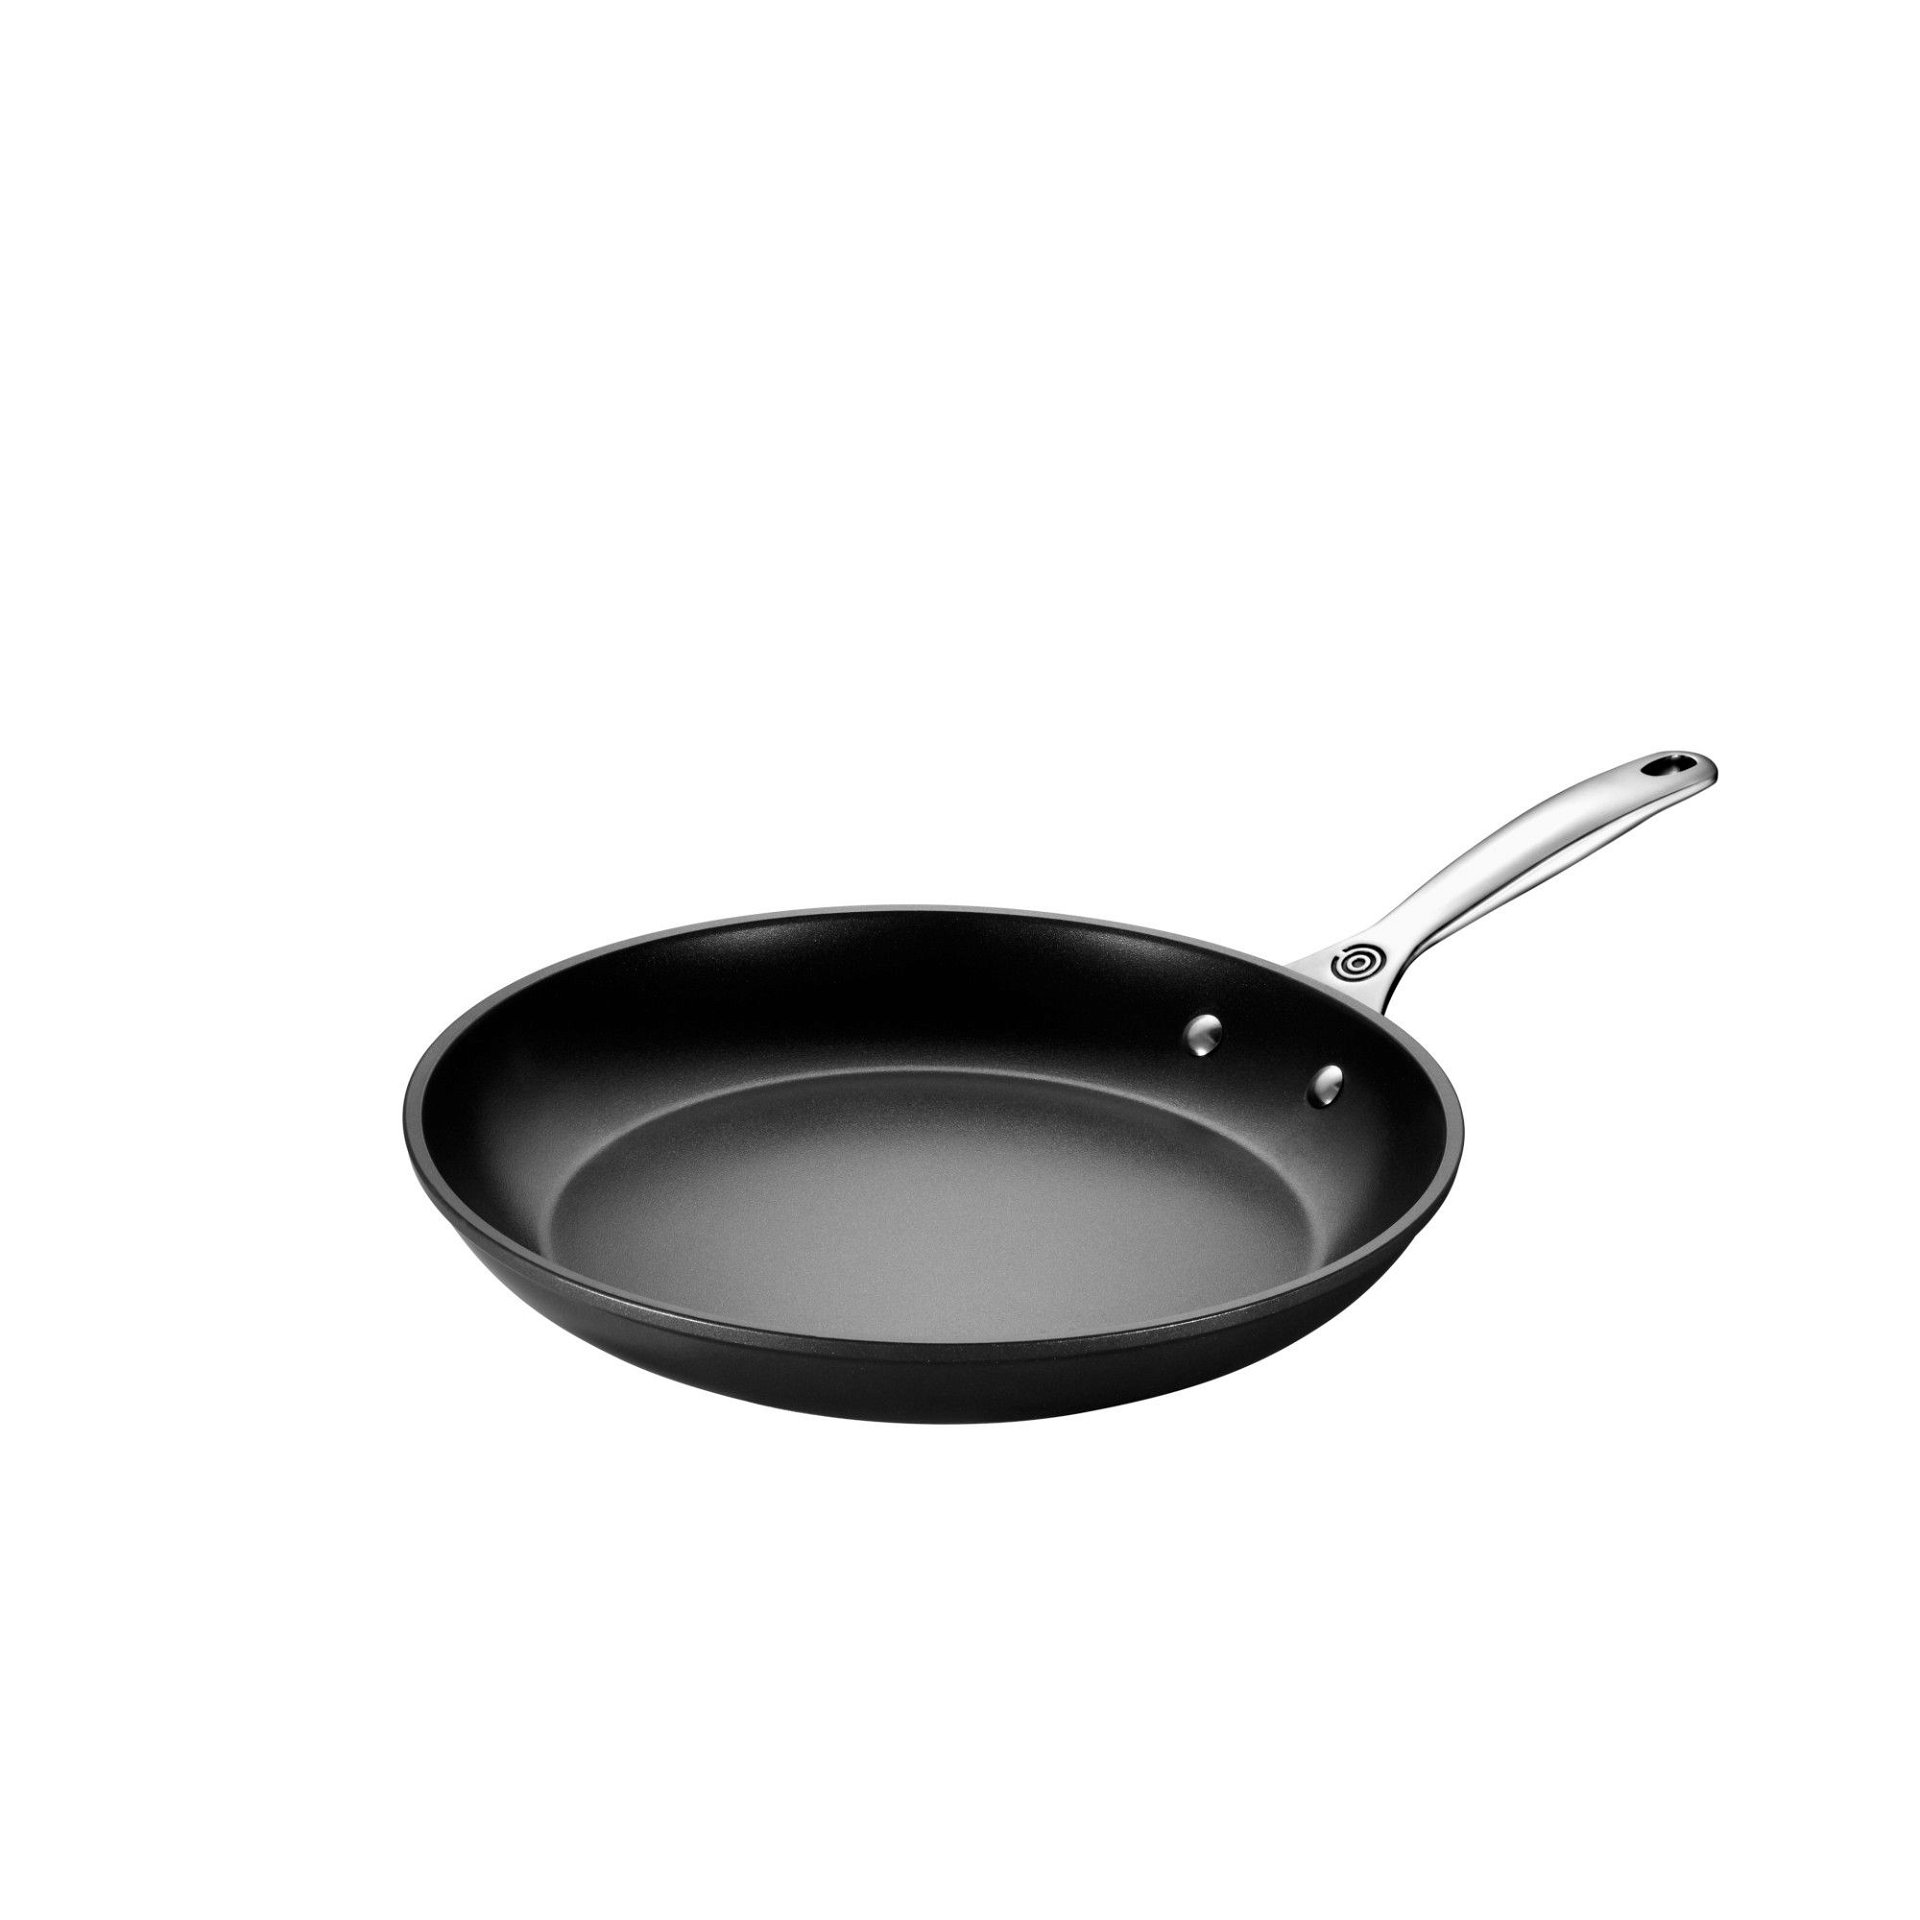  OXO Professional Hard Anodized PFAS-Free Nonstick, 12 Frying  Pan Skillet, Induction, Diamond reinforced Coating, Dishwasher Safe, Oven  Safe, Black: Home & Kitchen